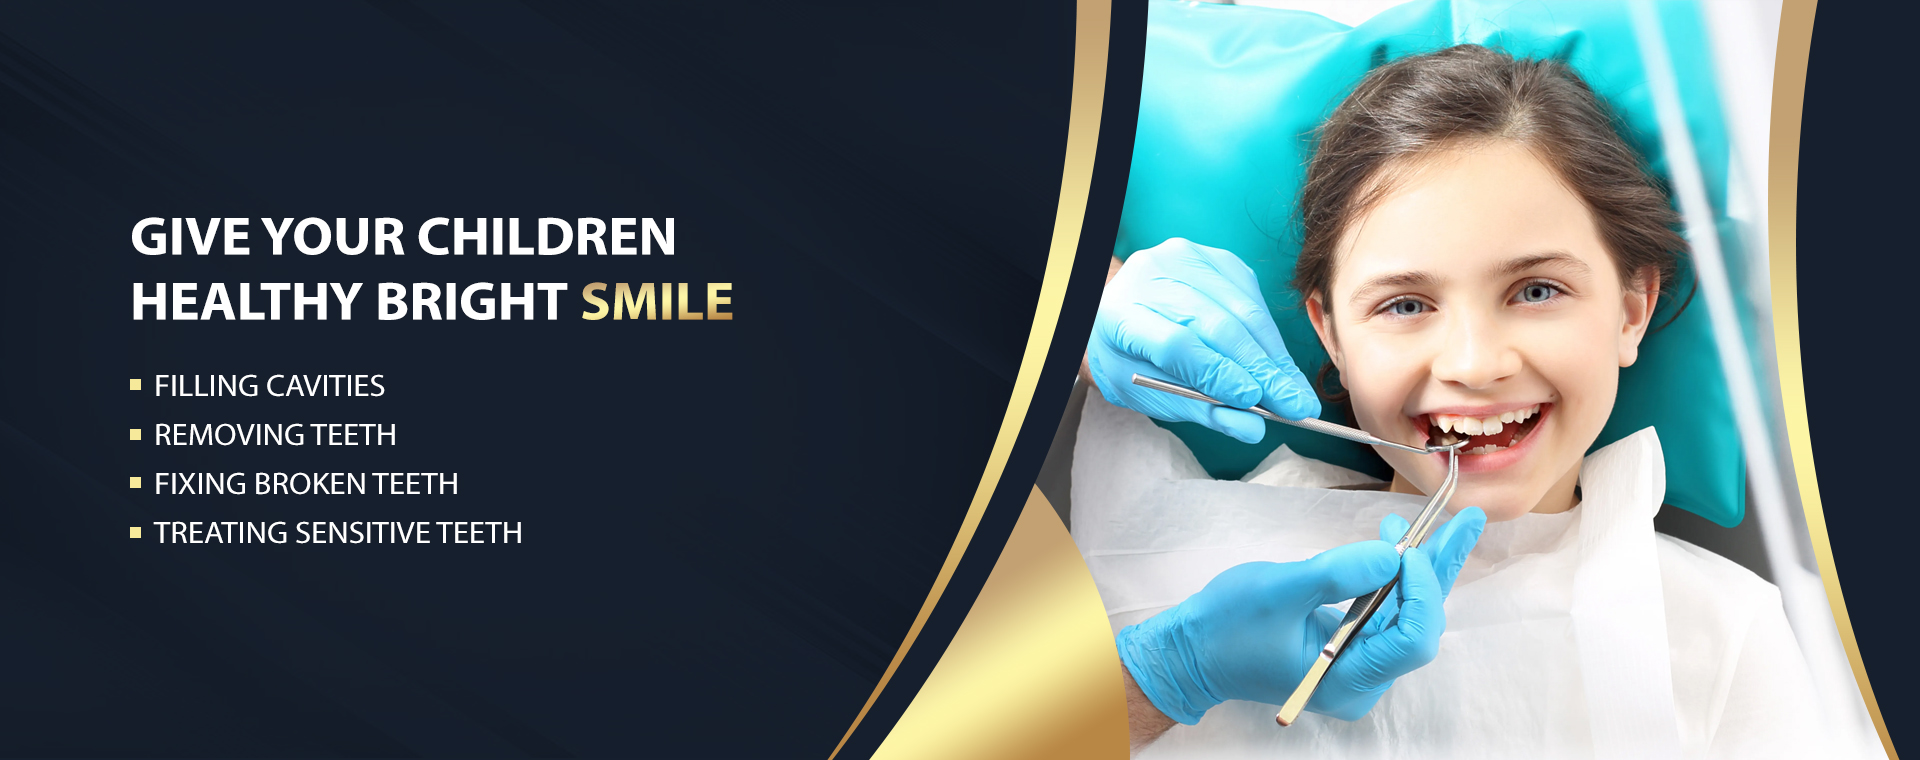 Dental Treatment for Children for Kids Dentistry at Lotus Dental Care Clinic, Best Dental Clinic in Vashi, Navi Mumbai guided by Dr. Sonal Agrawal Best Pediatric Dentist and Top Child Dental Specialist in Navi Mumbai